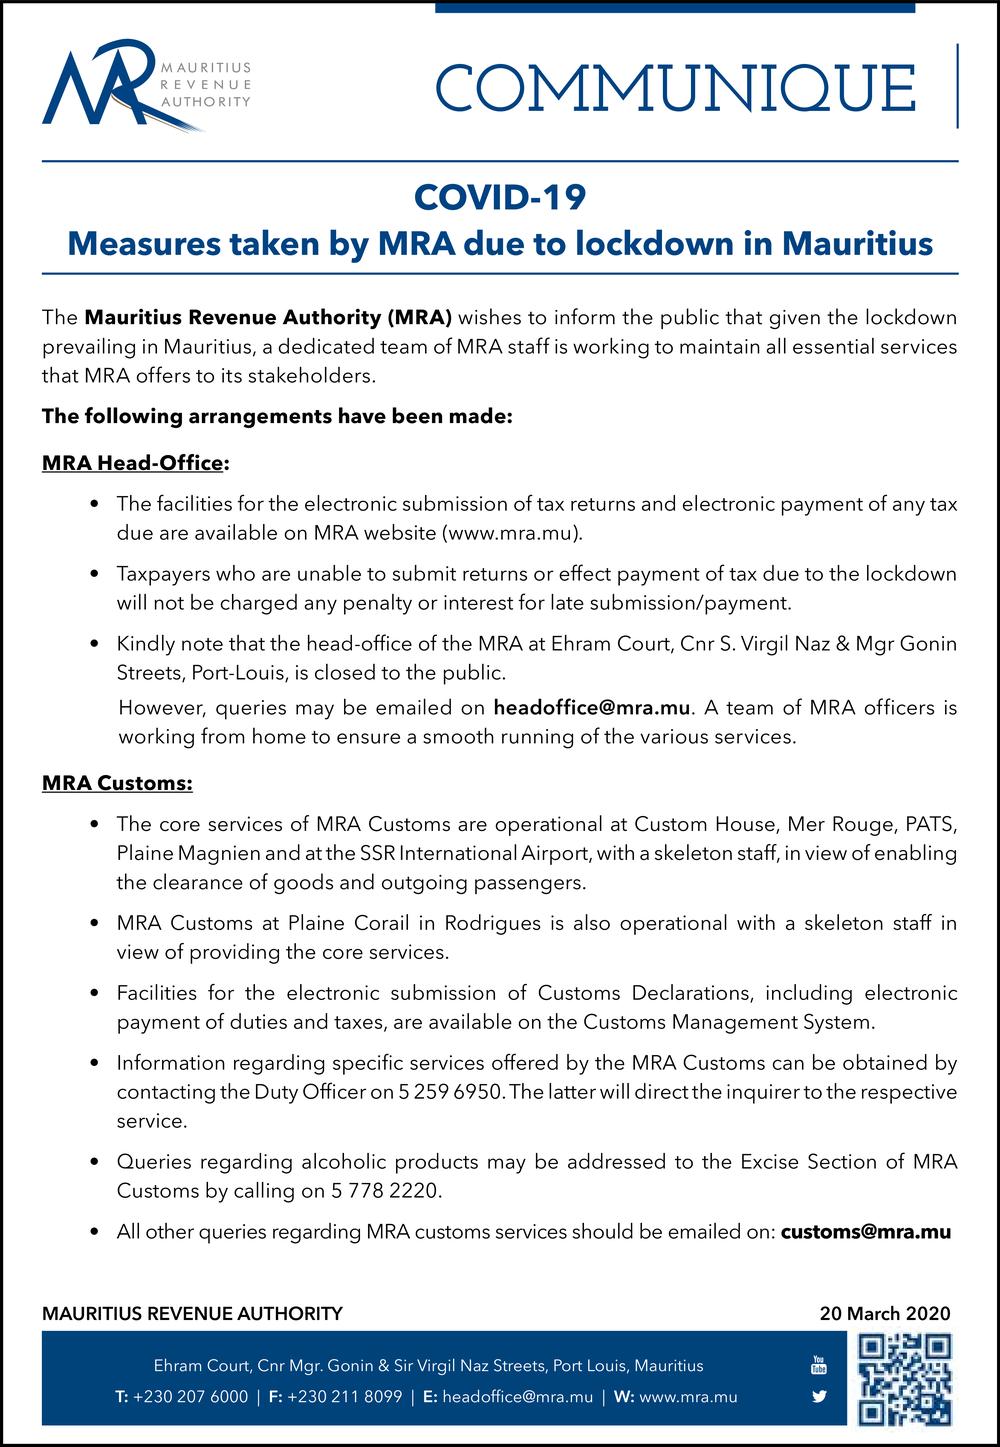 CommuniqueCovid19 - Measures taken by MRA due to lockdown in Mauritius